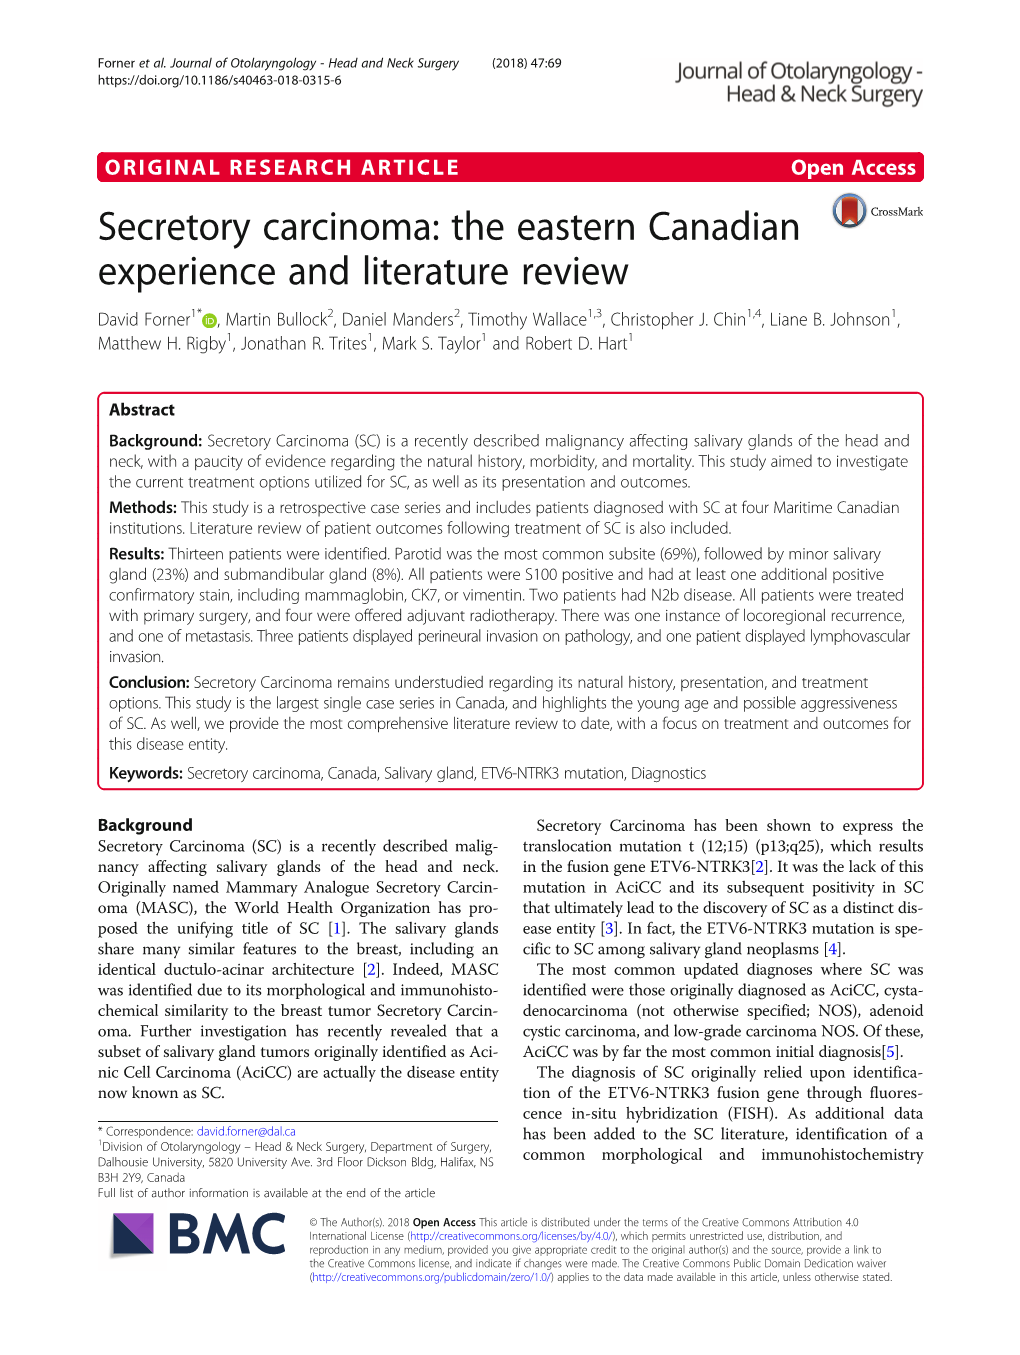 Secretory Carcinoma: the Eastern Canadian Experience and Literature Review David Forner1* , Martin Bullock2, Daniel Manders2, Timothy Wallace1,3, Christopher J